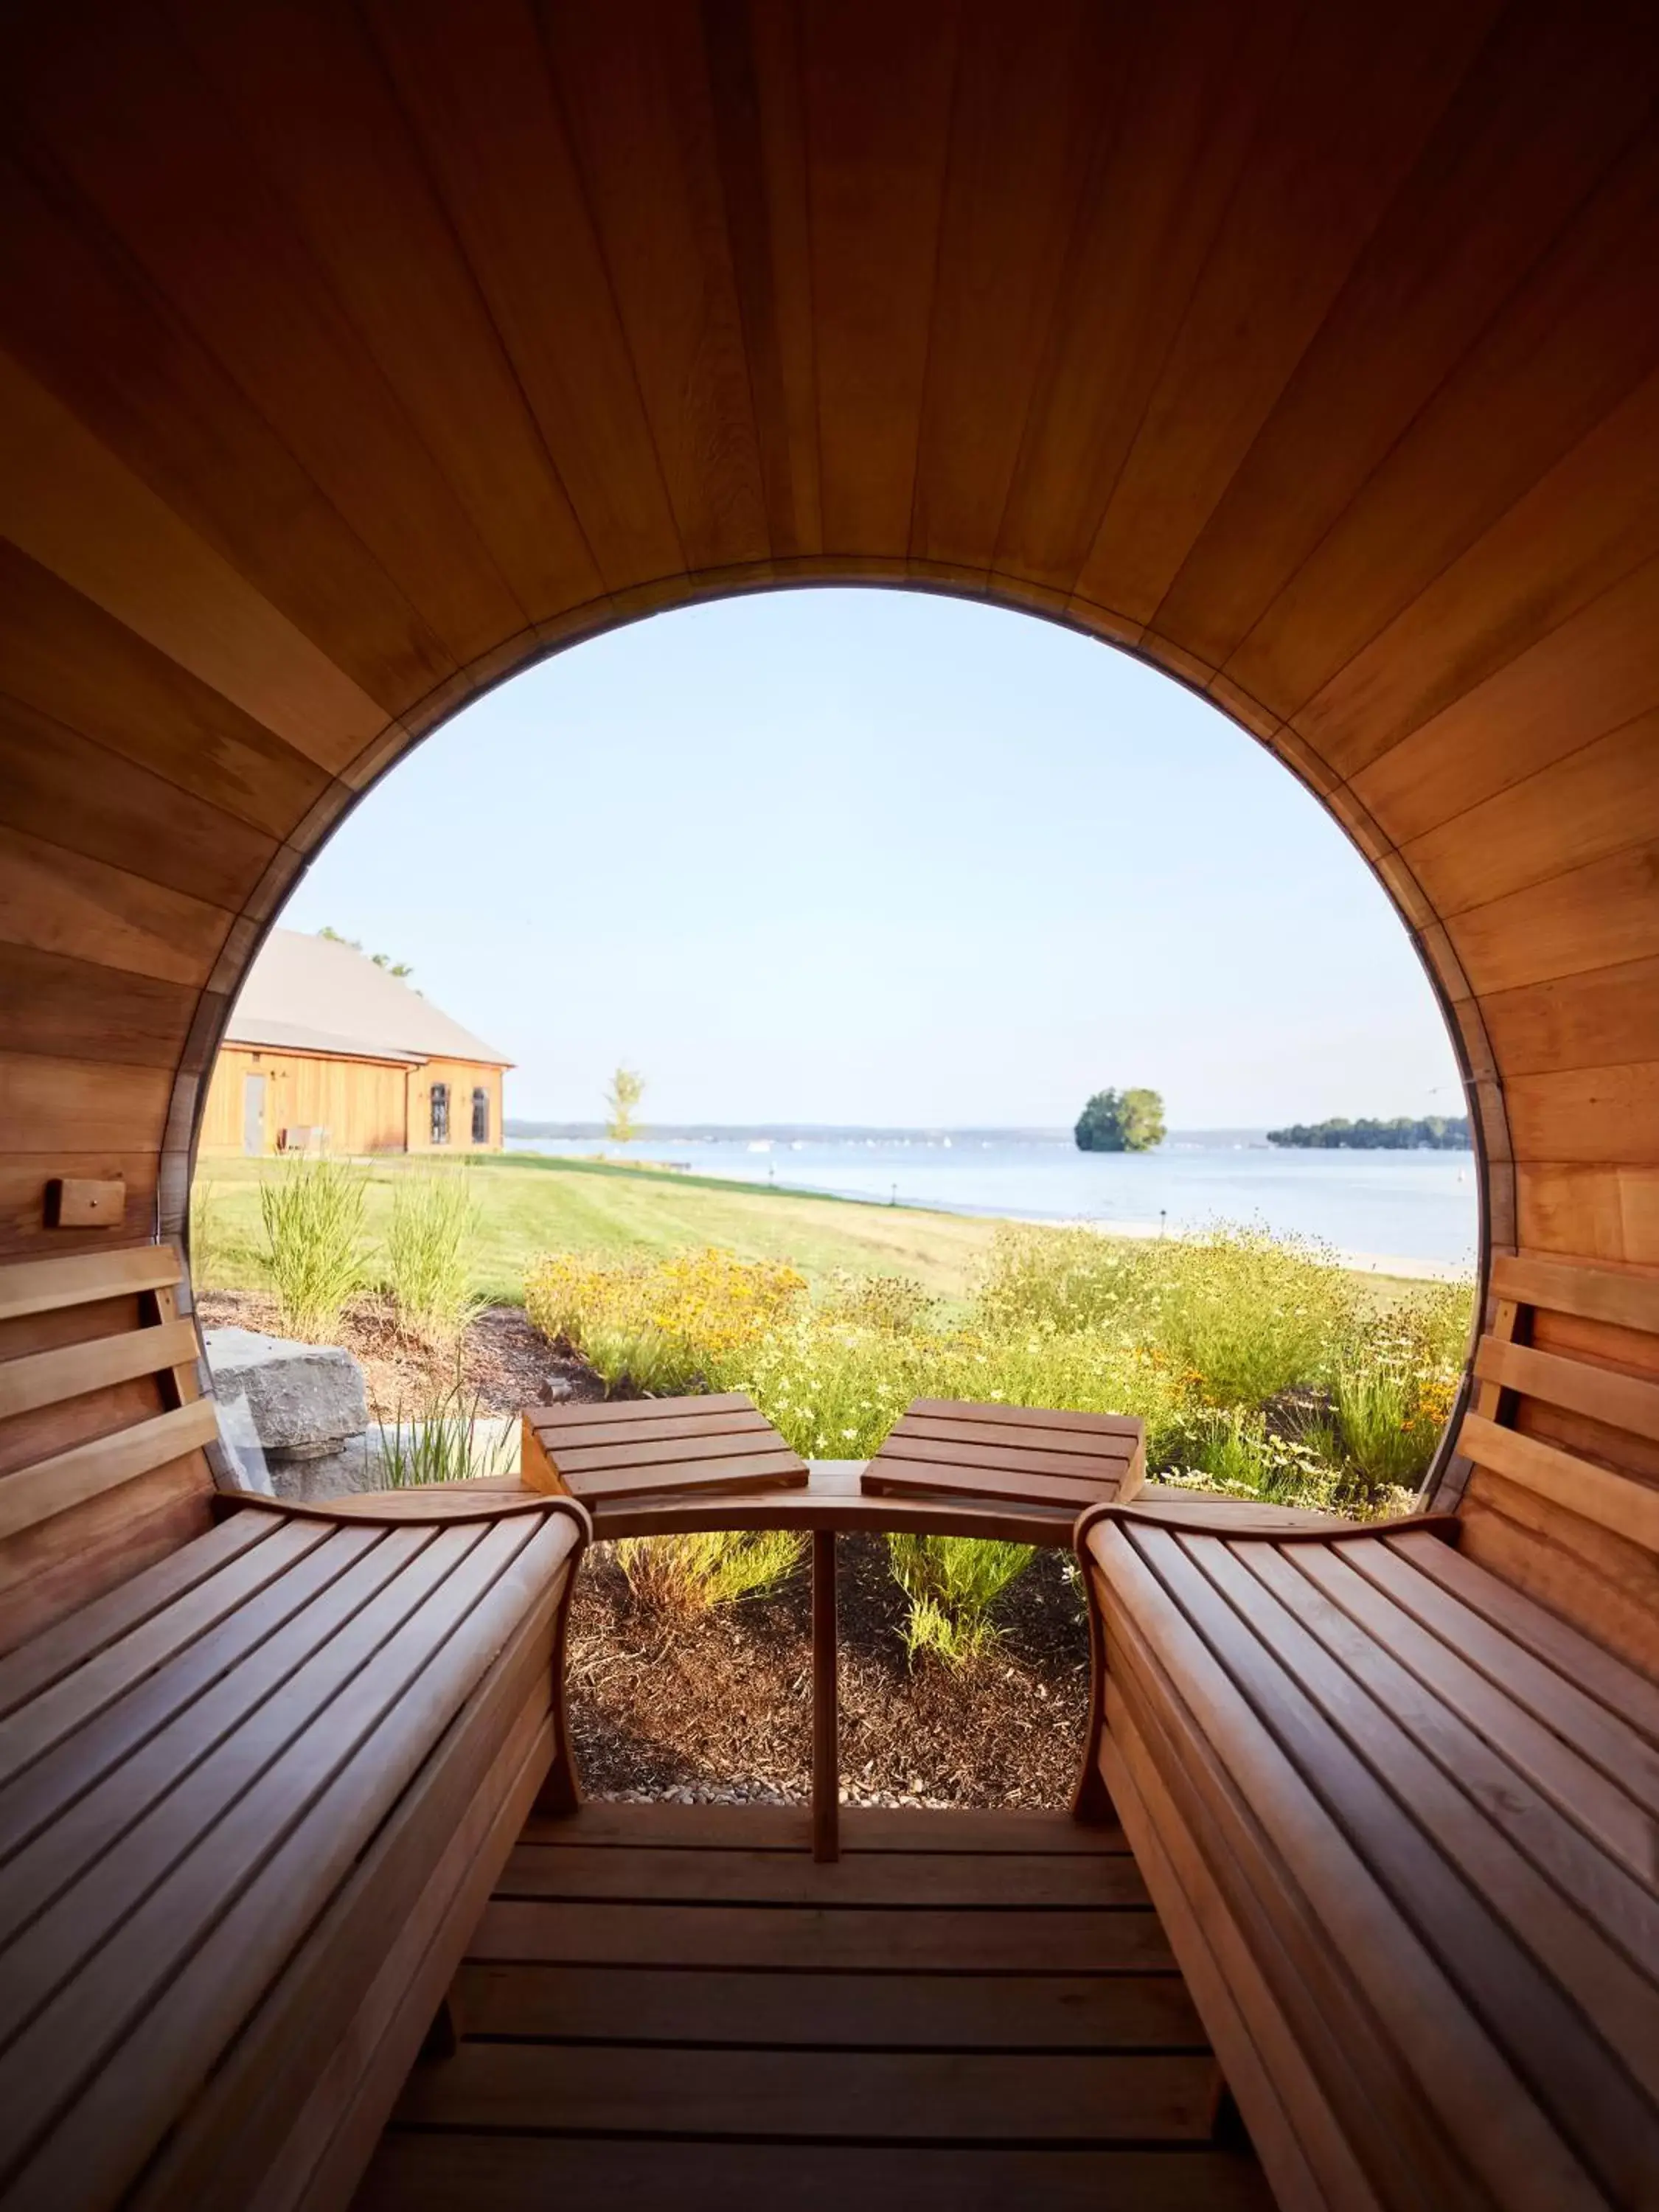 Sauna in The Lake House on Canandaigua